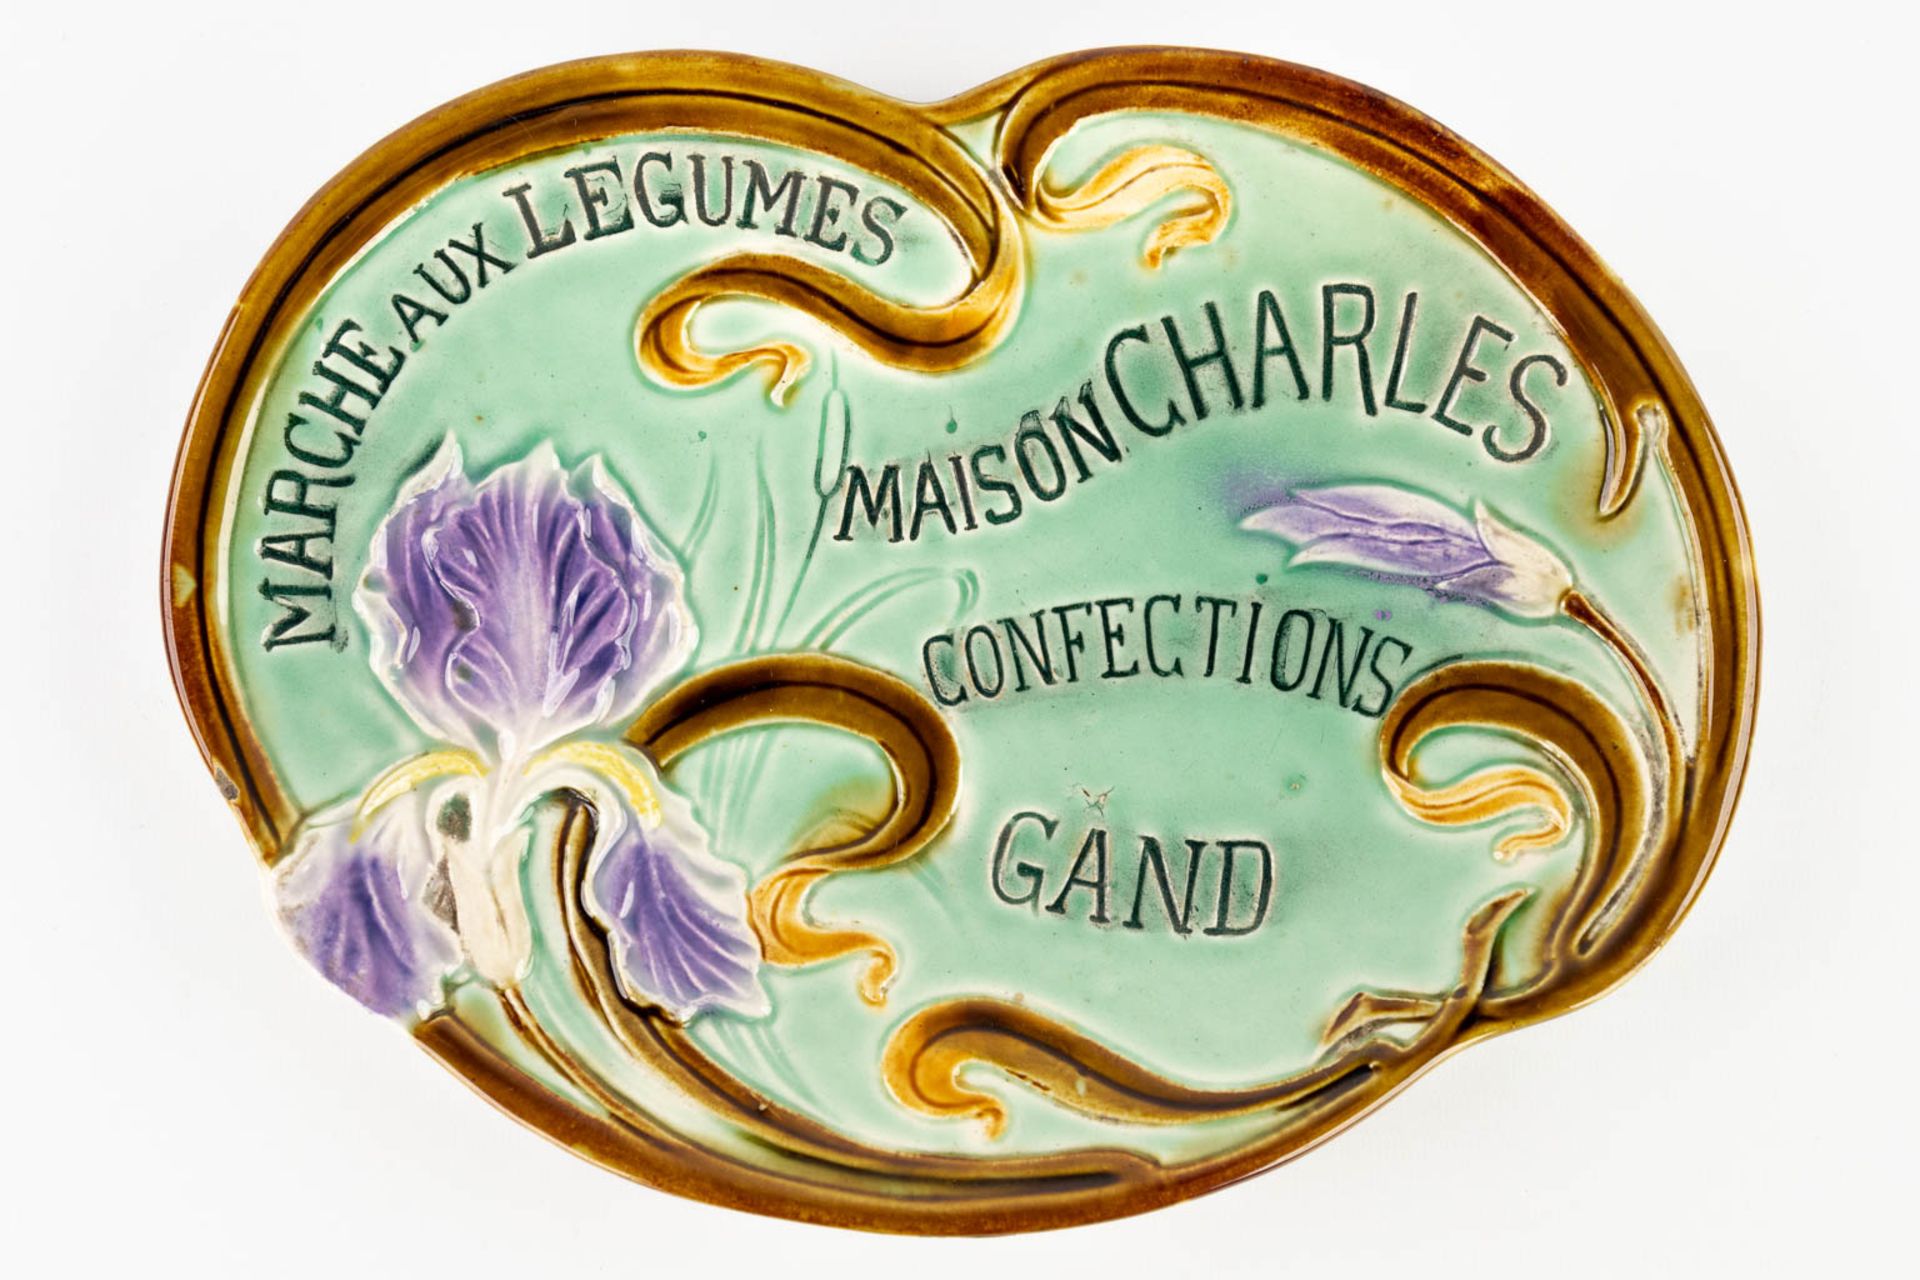 Hasselts Faience, a bowl ?Maison Charles? Confections Gand, Belgium, 19th C. (D:20 x W:26 x H:3,5 cm - Image 3 of 7